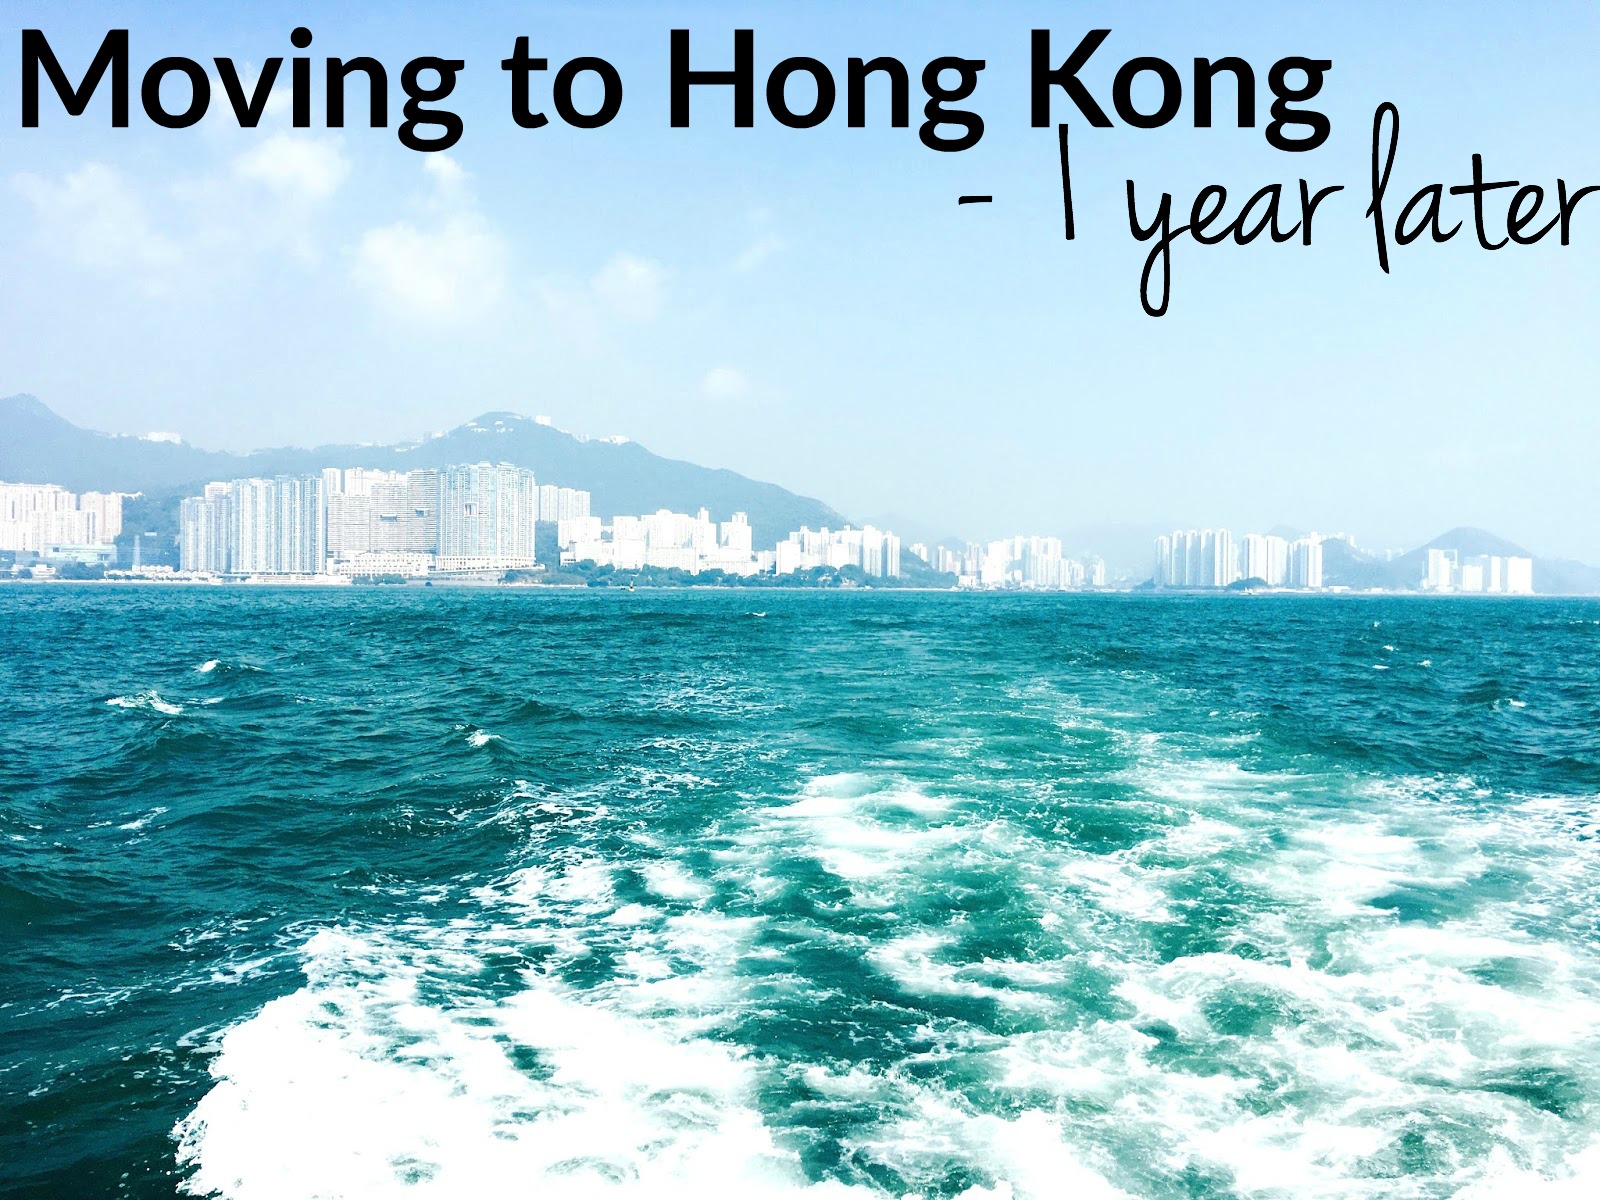 Moving to Hong Kong – One year later